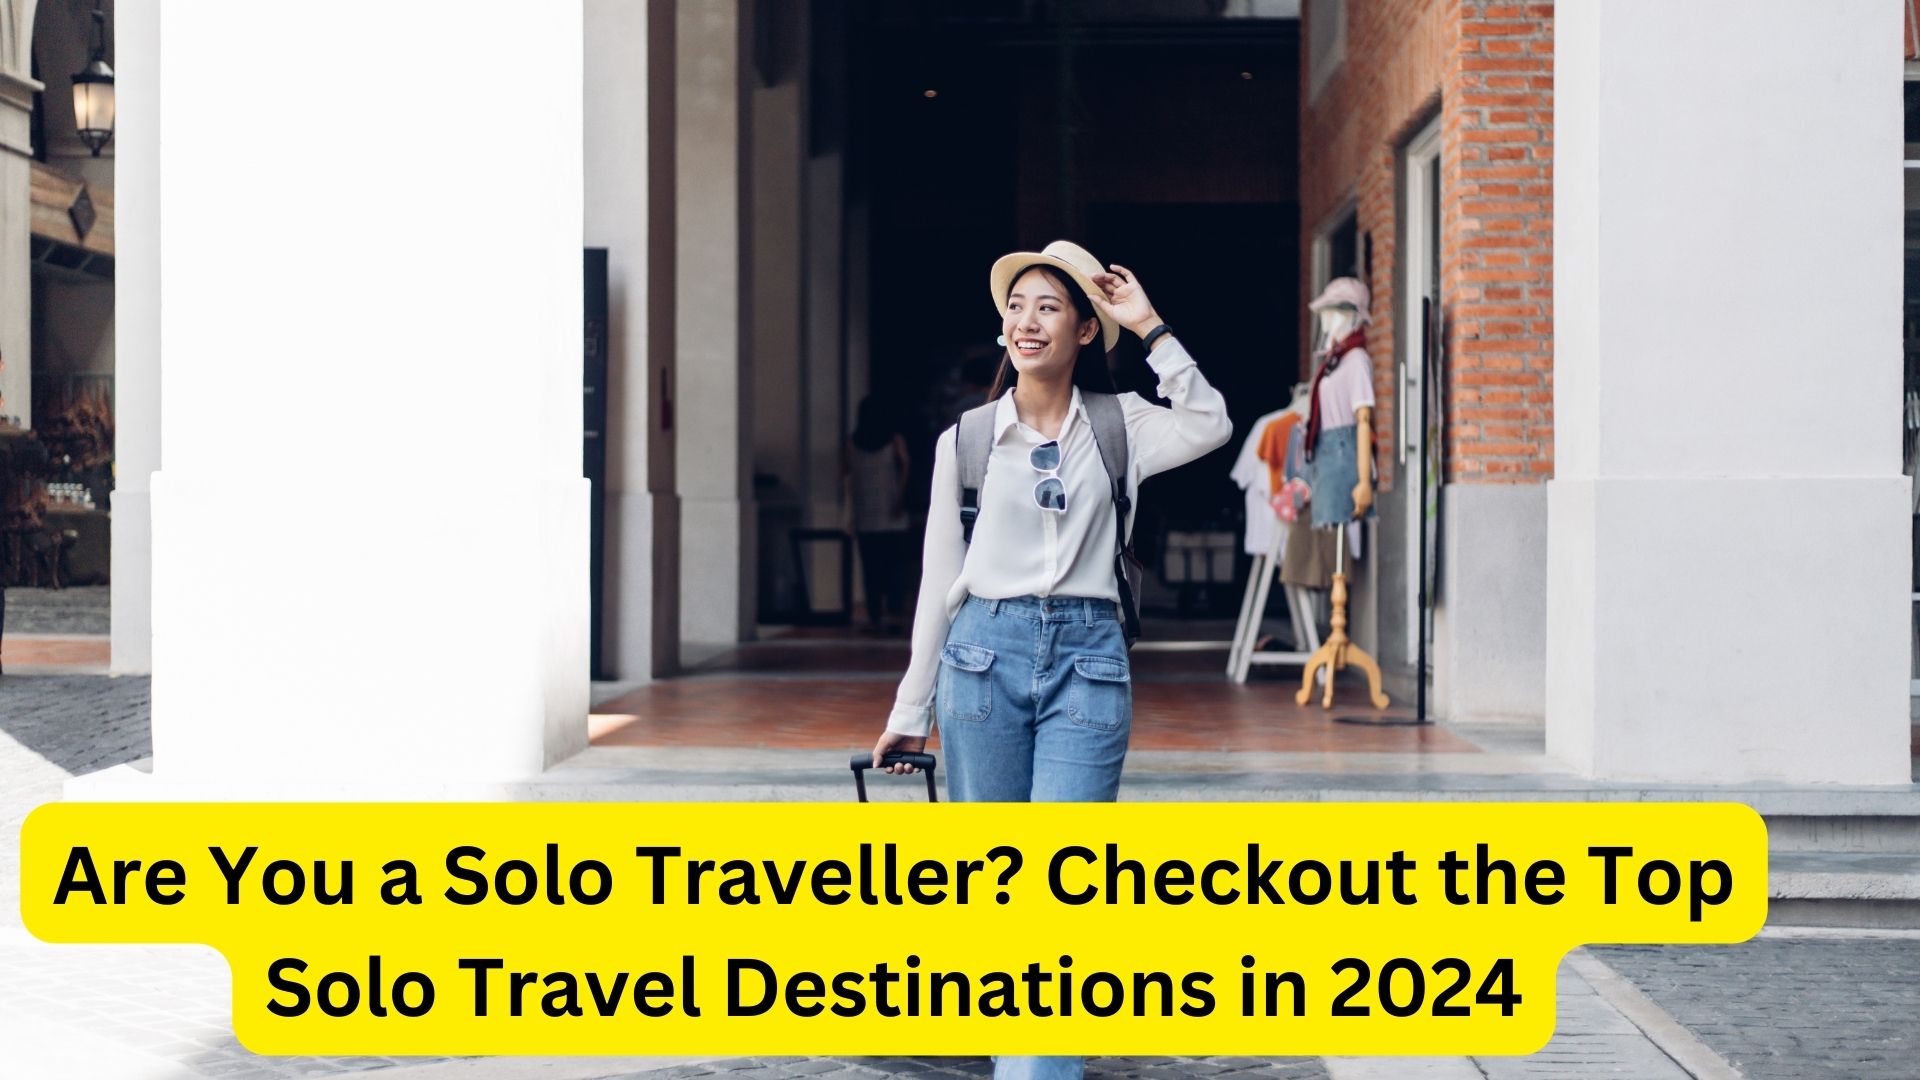 Are You a Solo Traveller? Checkout the Top Solo Travel Destinations in 2024